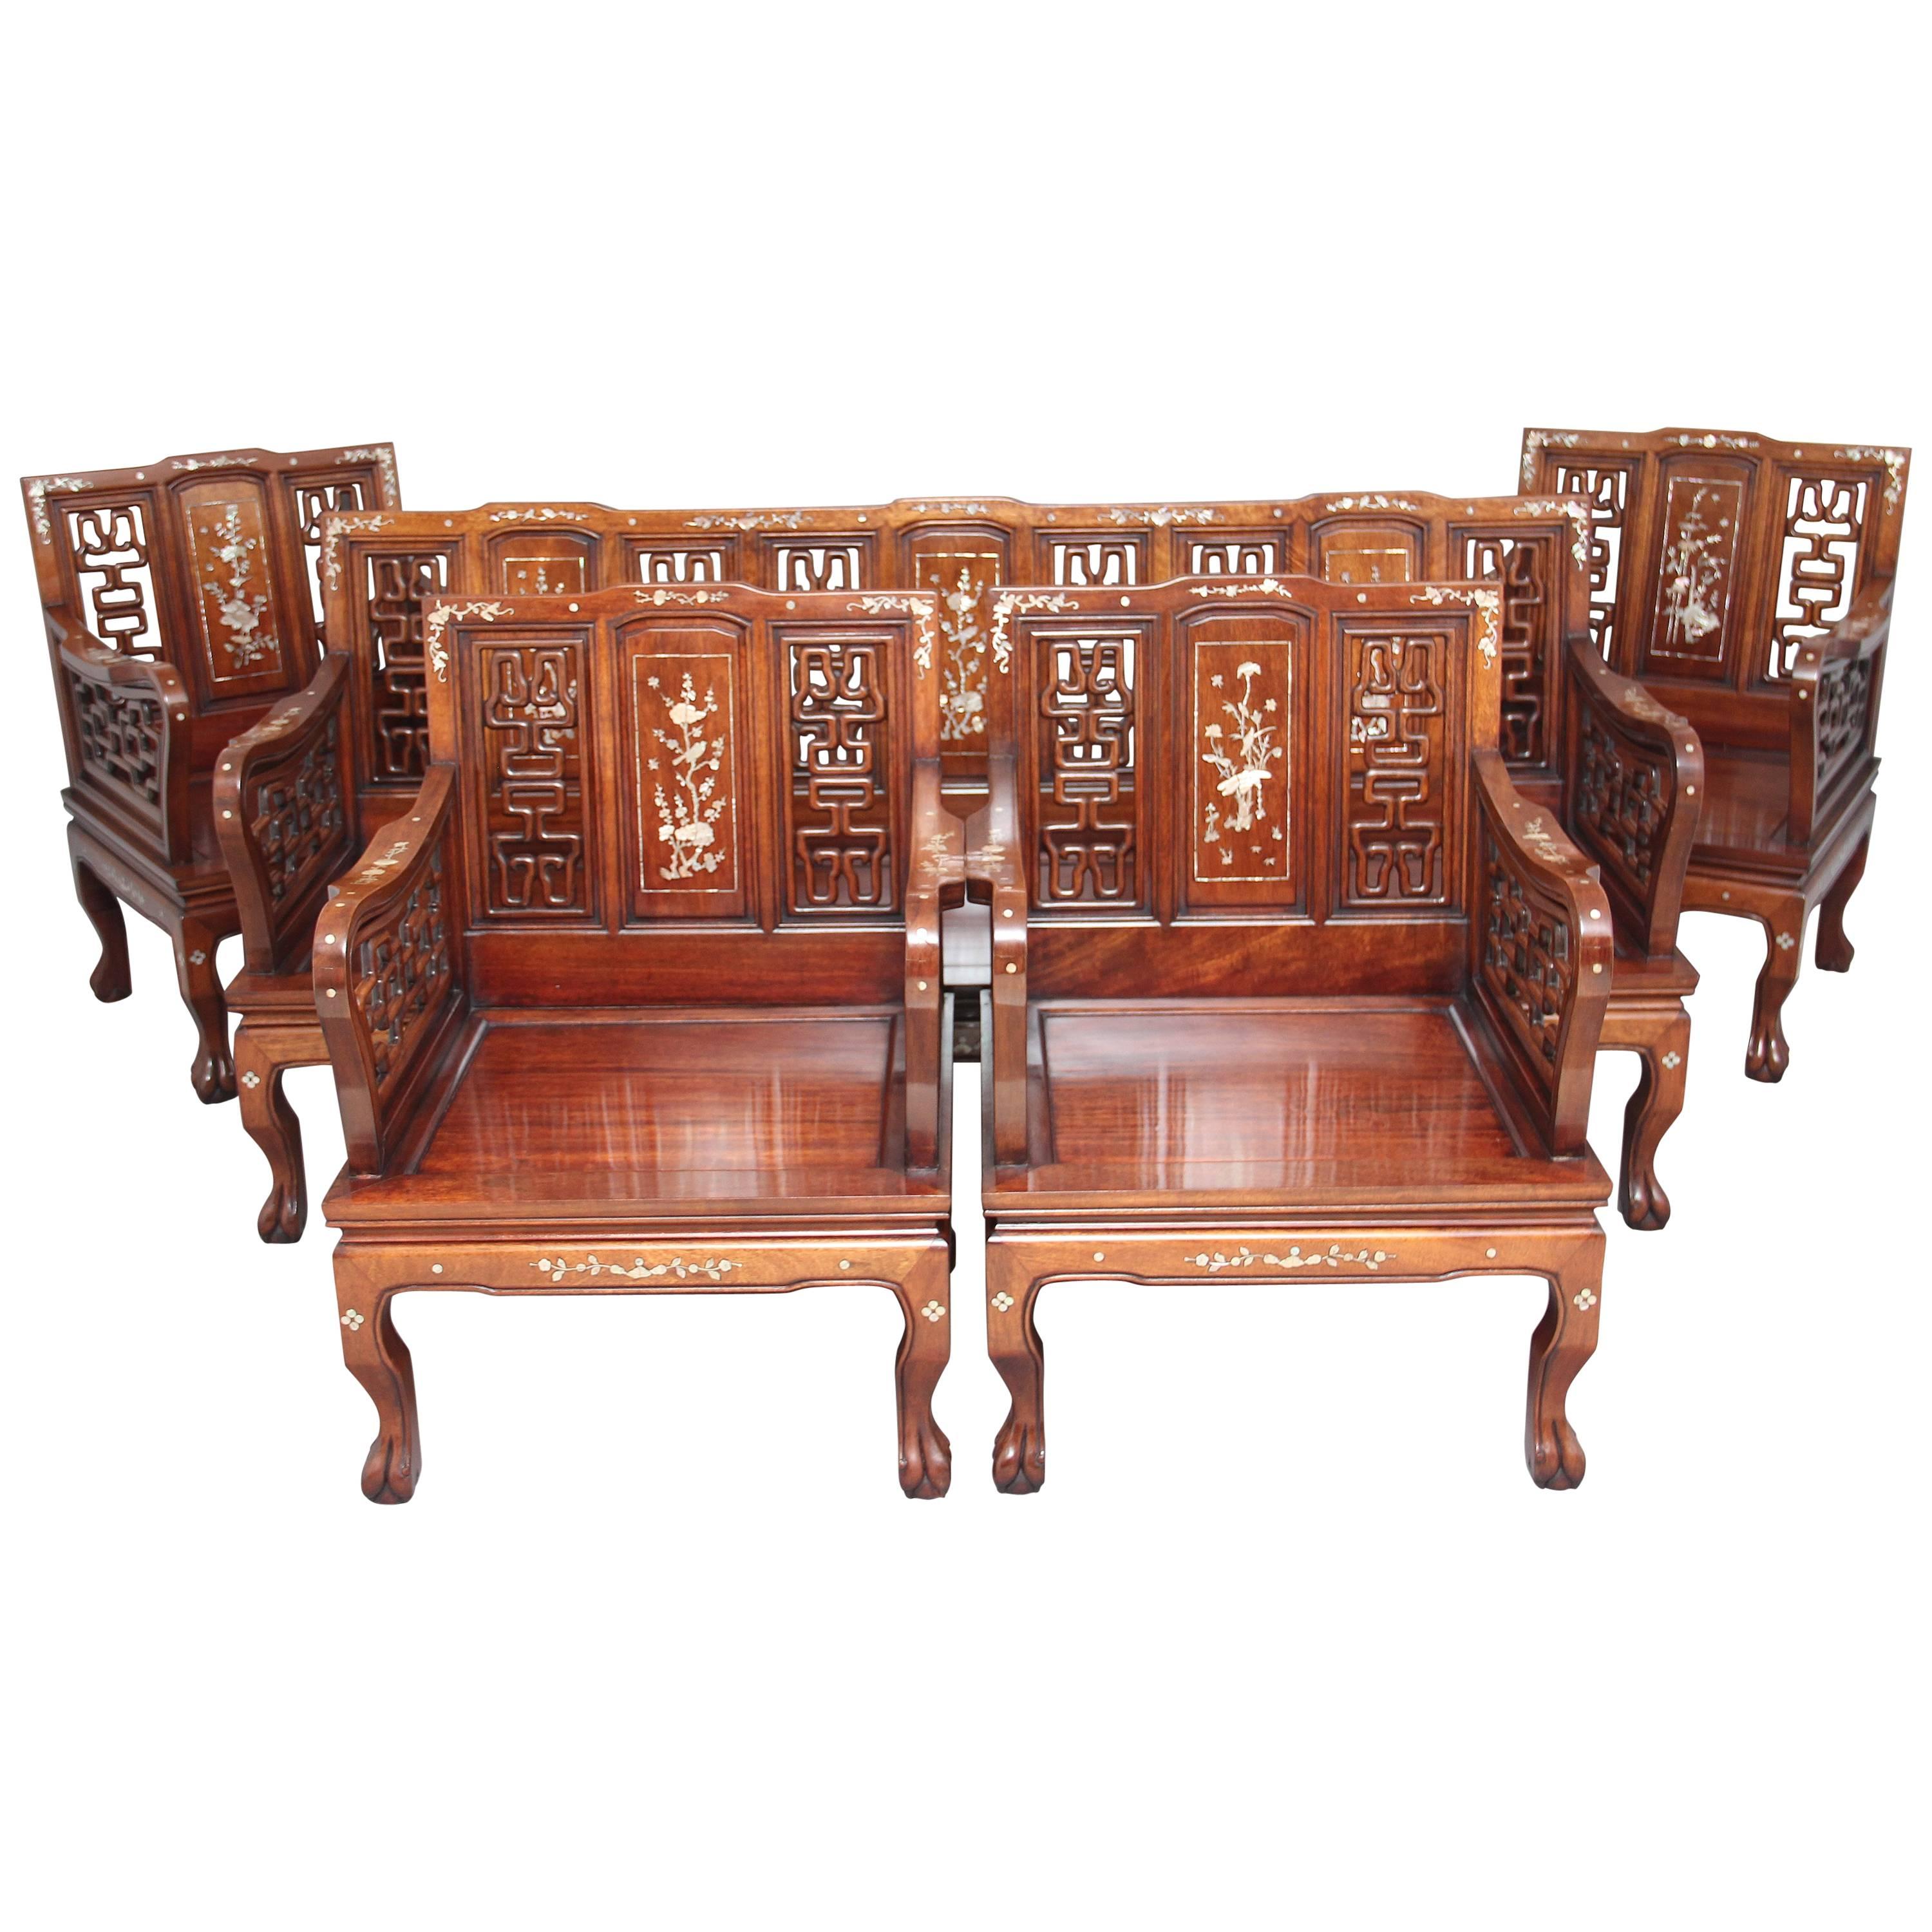 Early 20th Century Chinese Five-Piece Suite